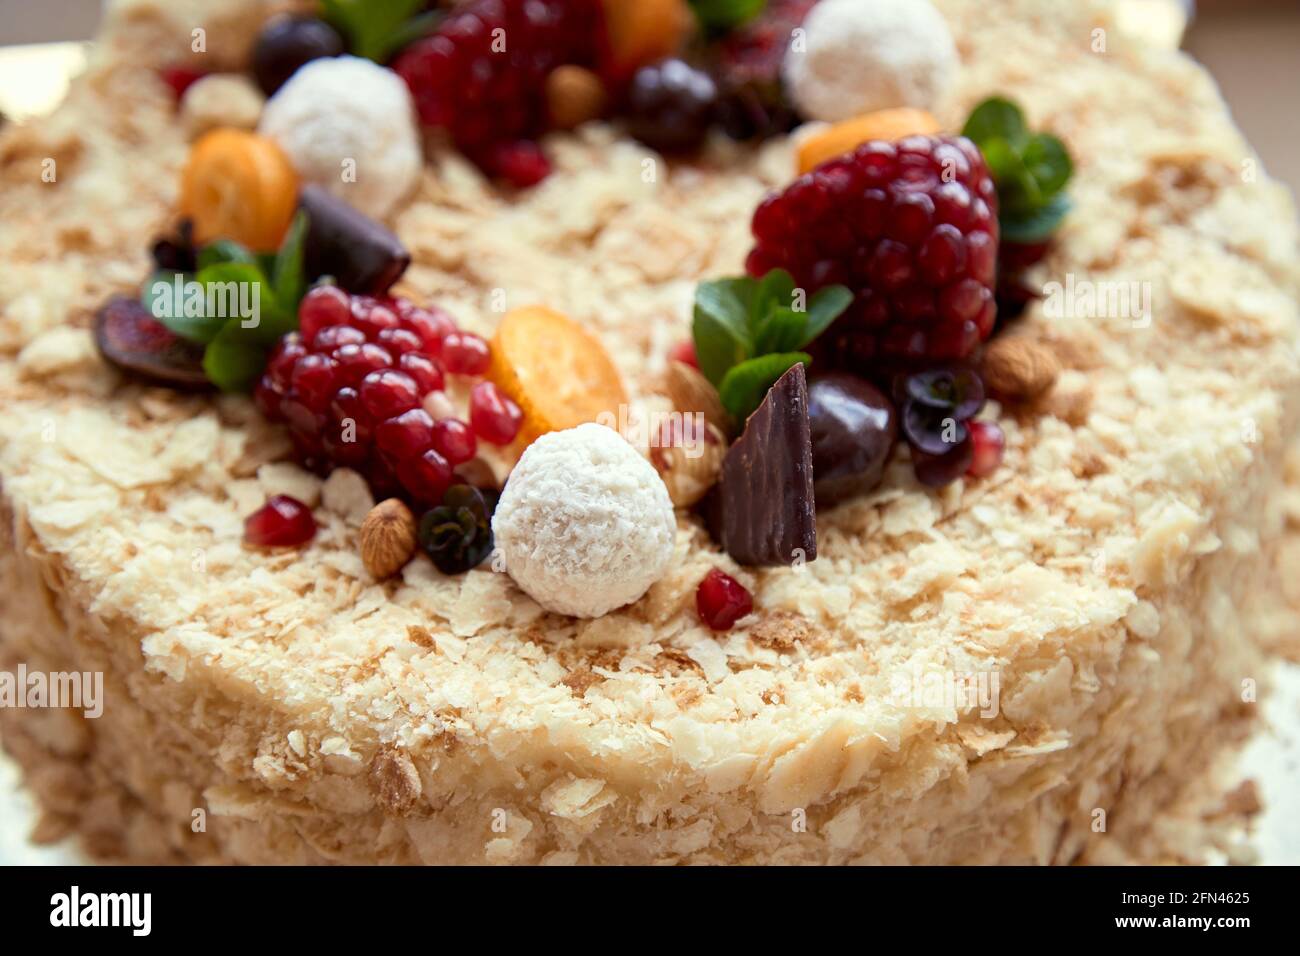 Birthday cake decorated with fruit, pomegranate seeds, chocolate and grapes. Top view. High quality photo Stock Photo